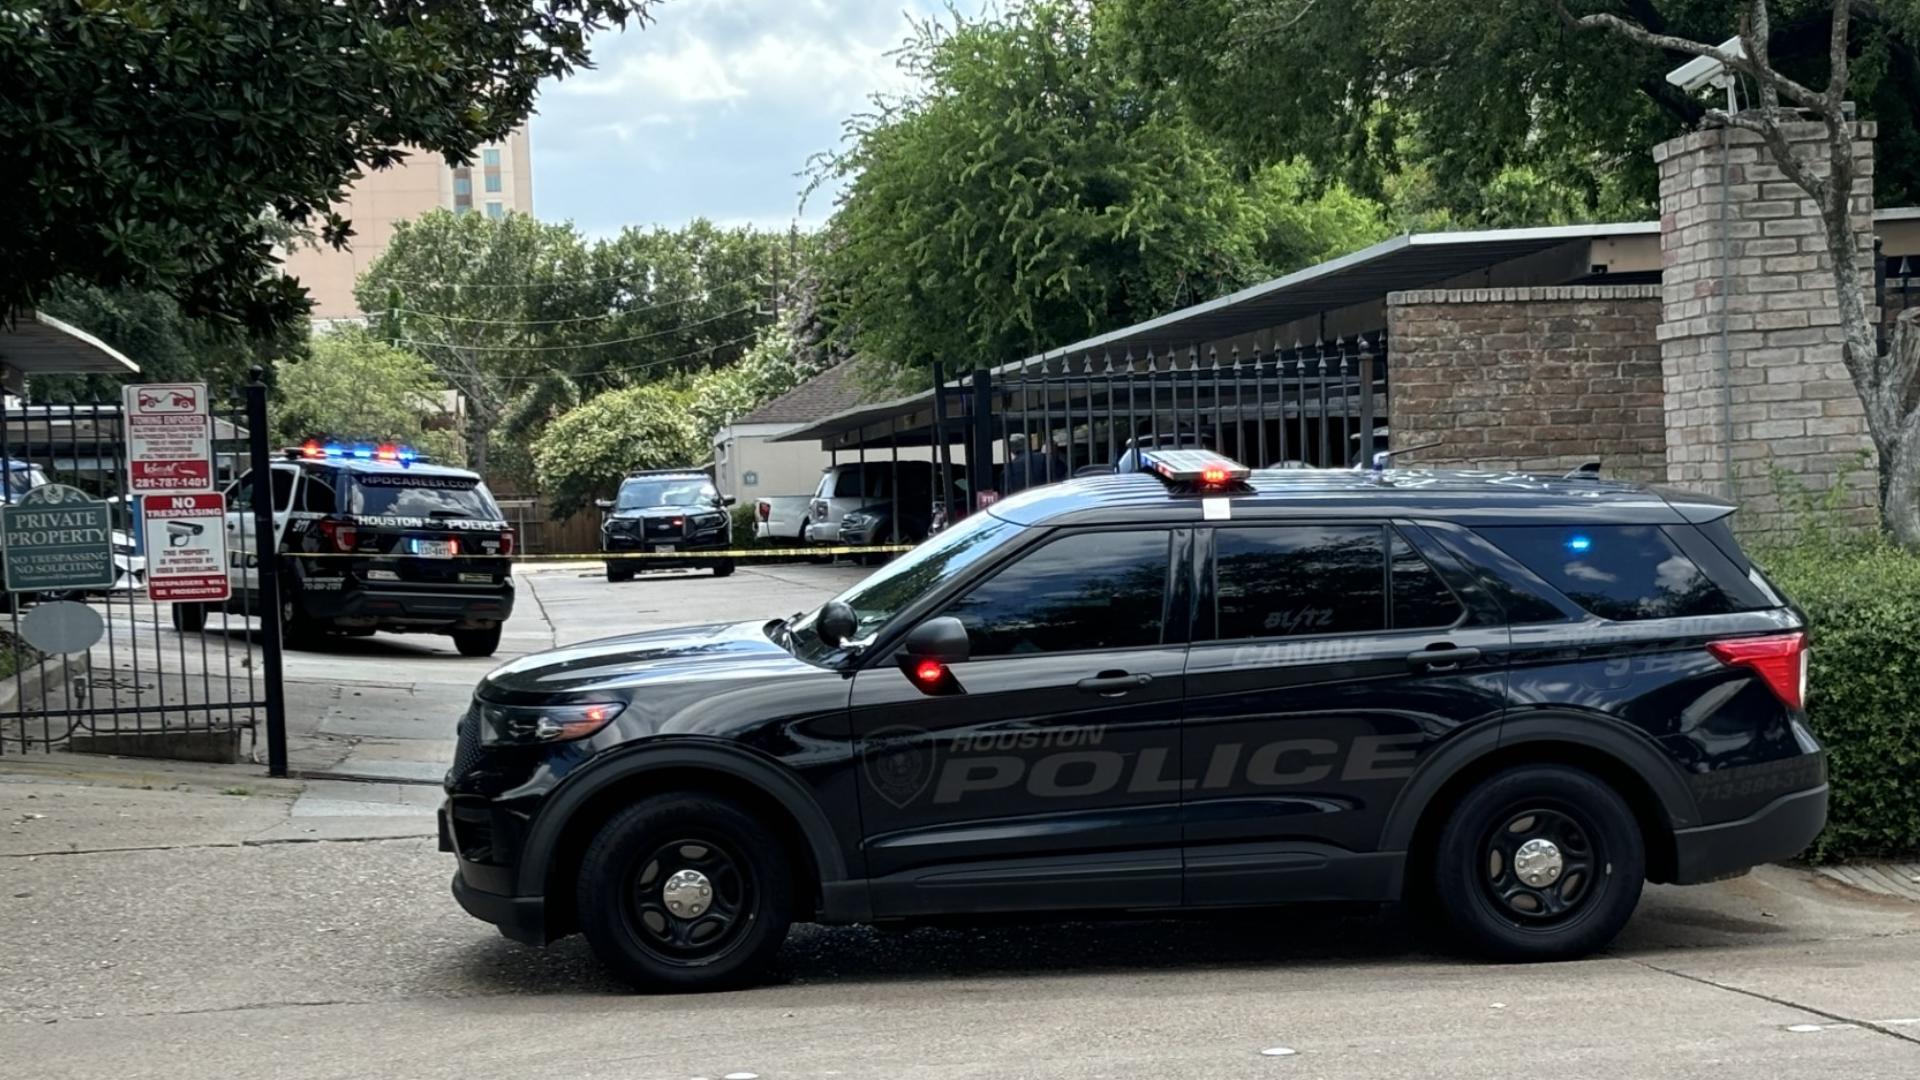 HPD said the person was barricaded at an apartment on North Stadium Drive, which is near where Old Spanish Trail turns into South Main Street.